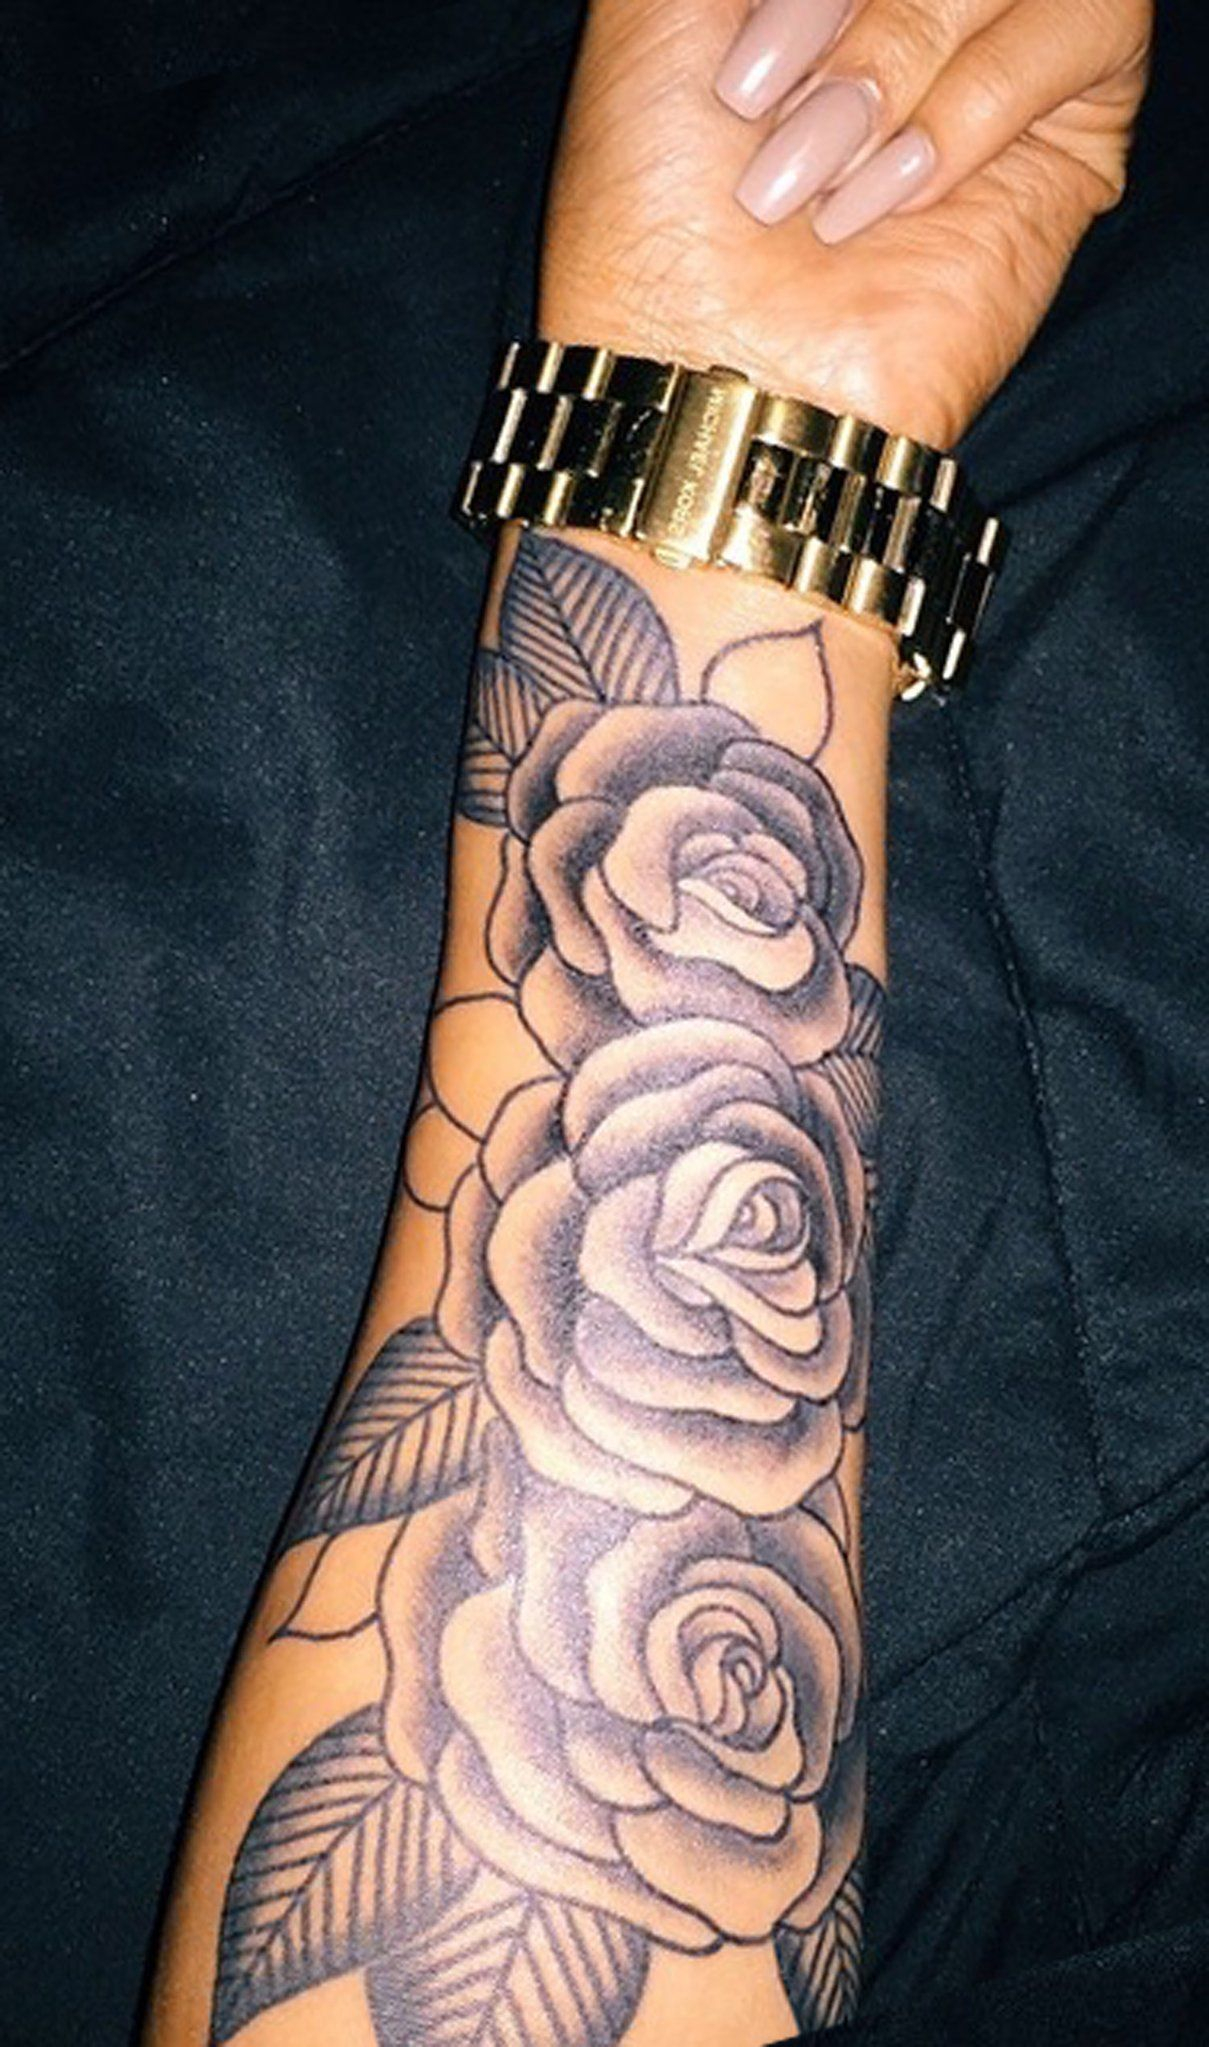 Realistic Vintage Rose Forearm Tattoo Ideas For Women Black Floral in dimensions 1209 X 2047